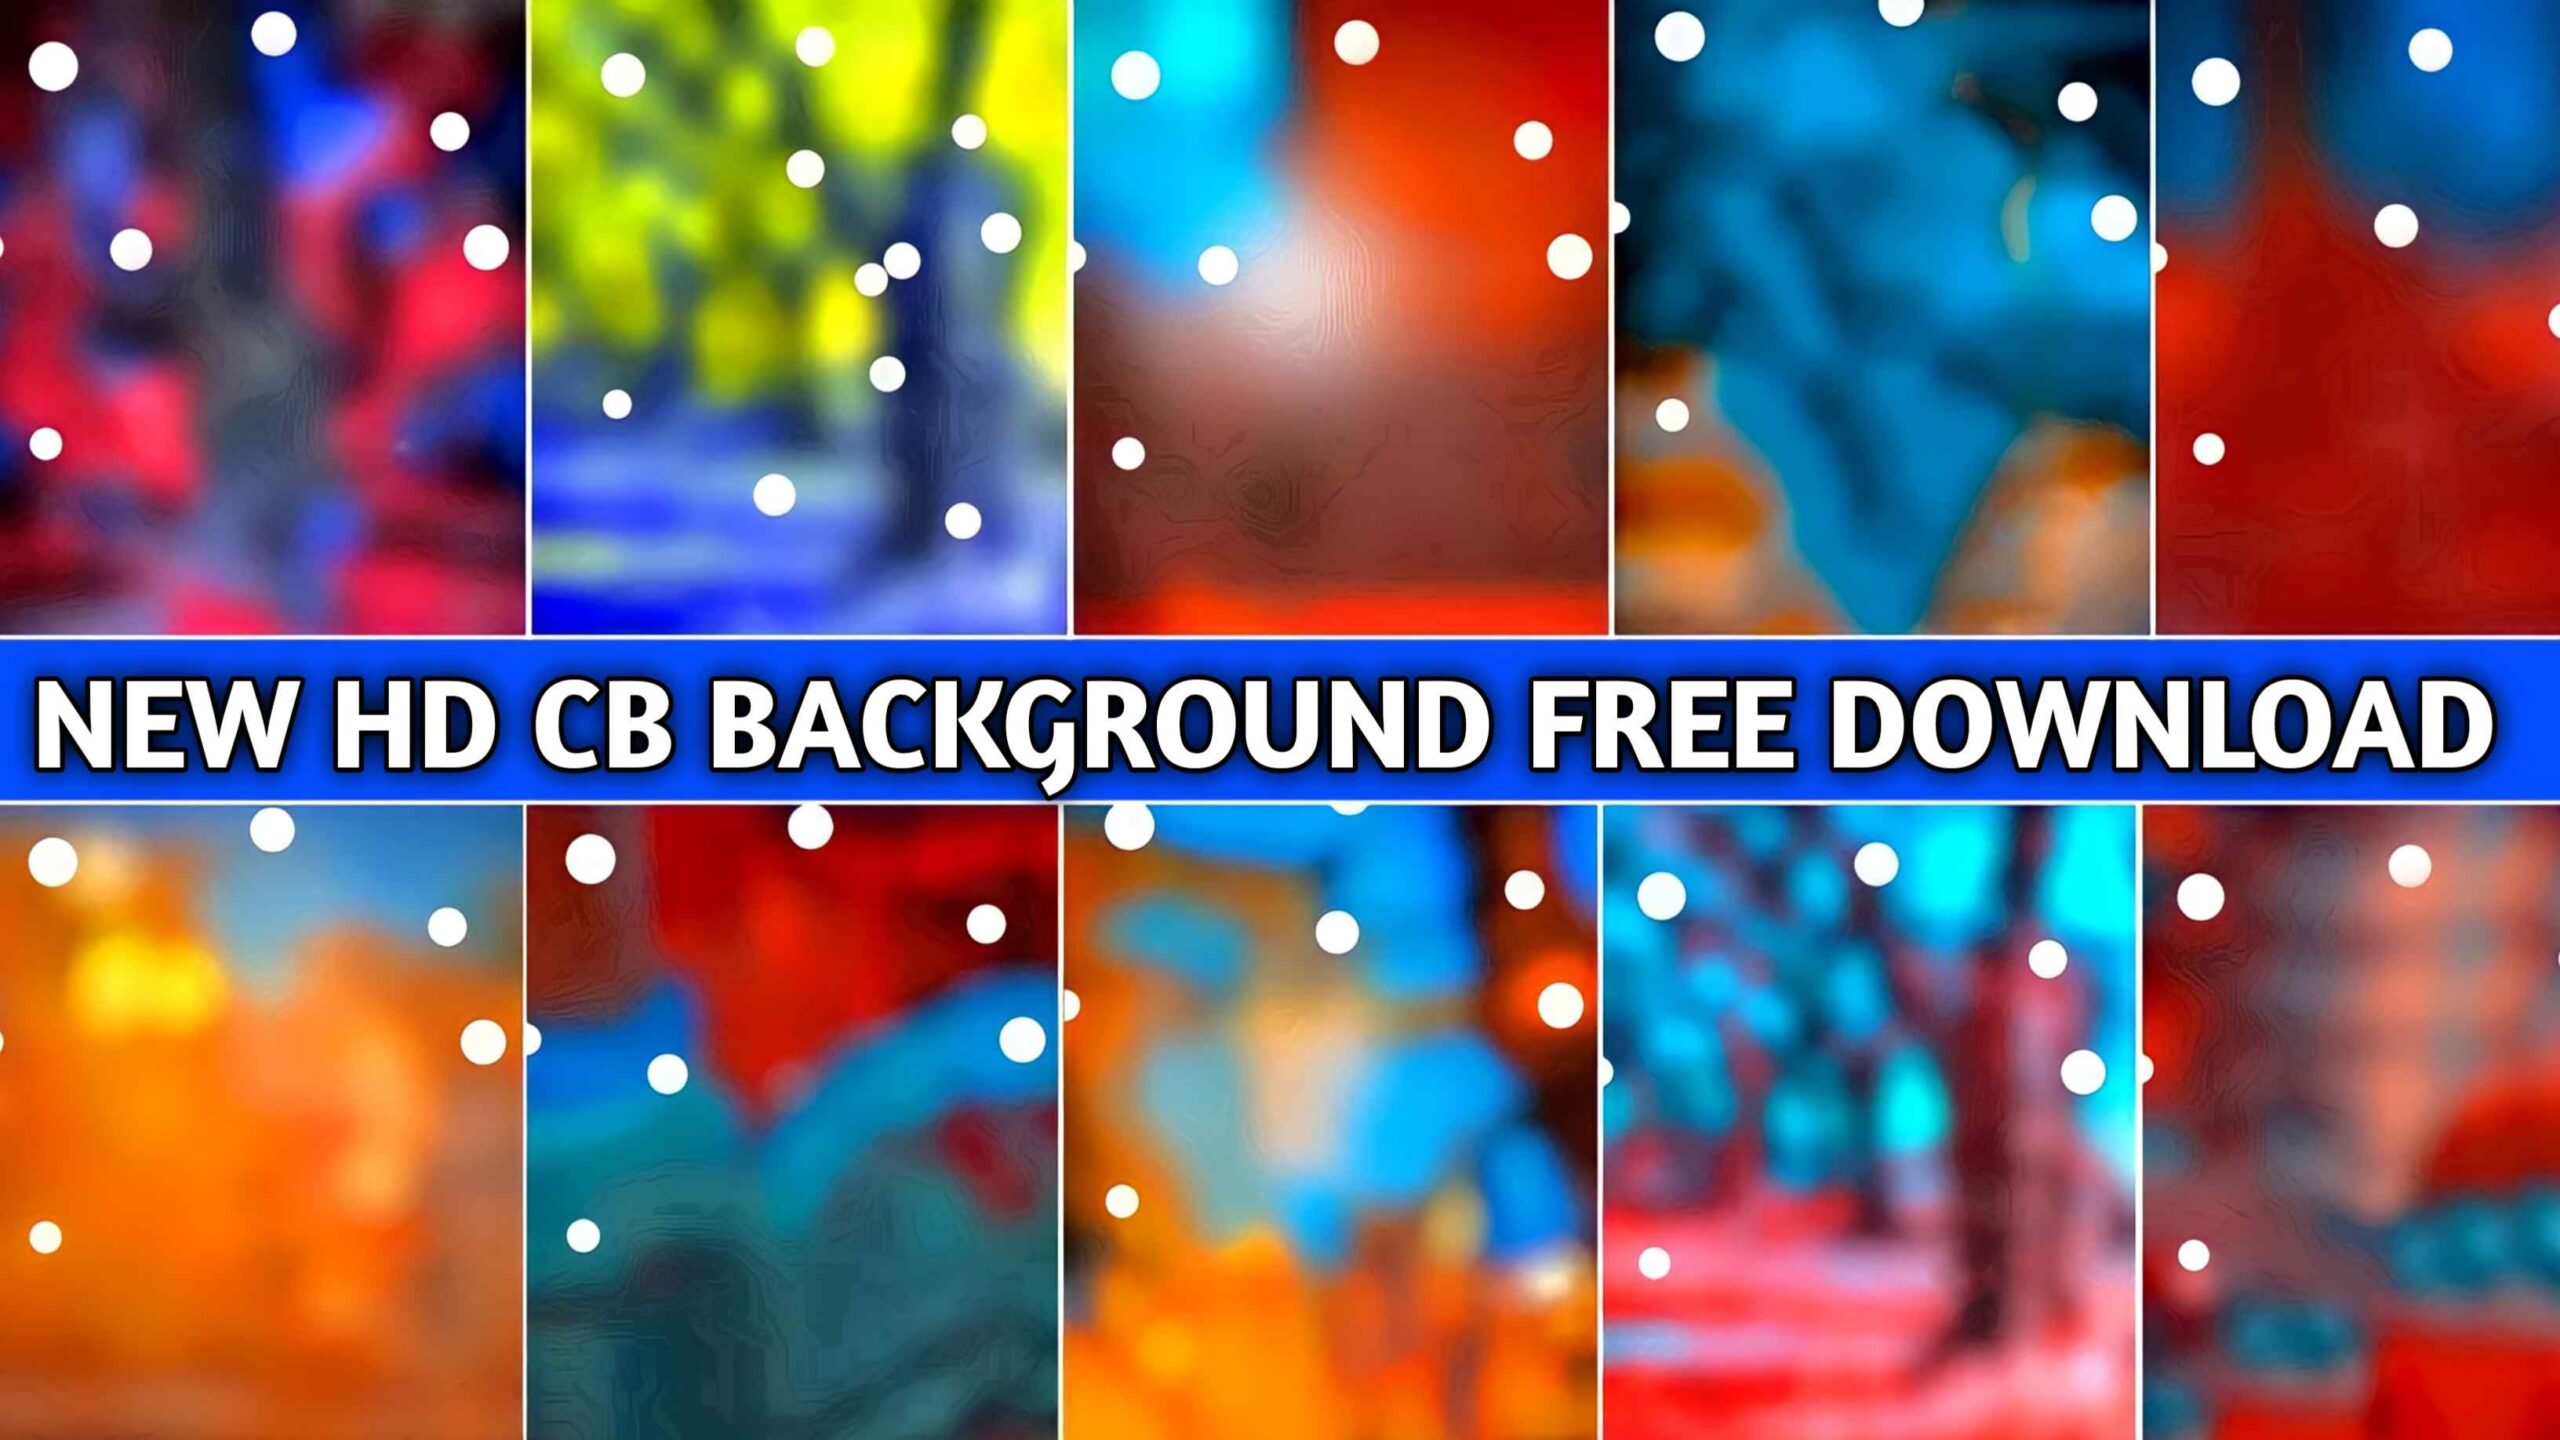 100 Best CB Background Wallpapers & Photos